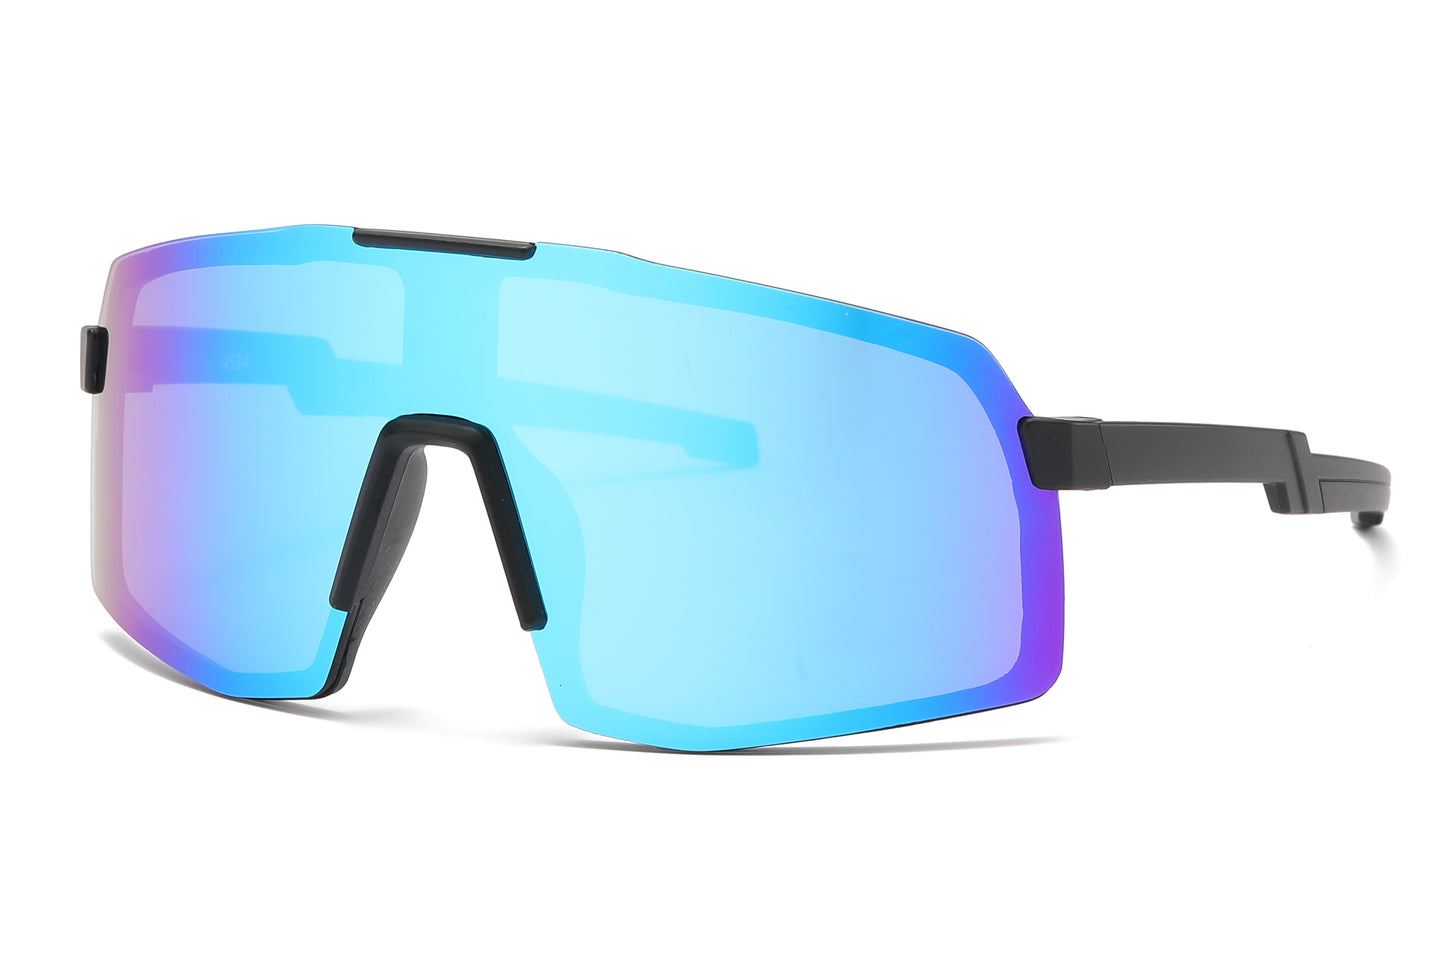 4584 - Kids Sport One shield Sunglasses with Color Mirrored Lens